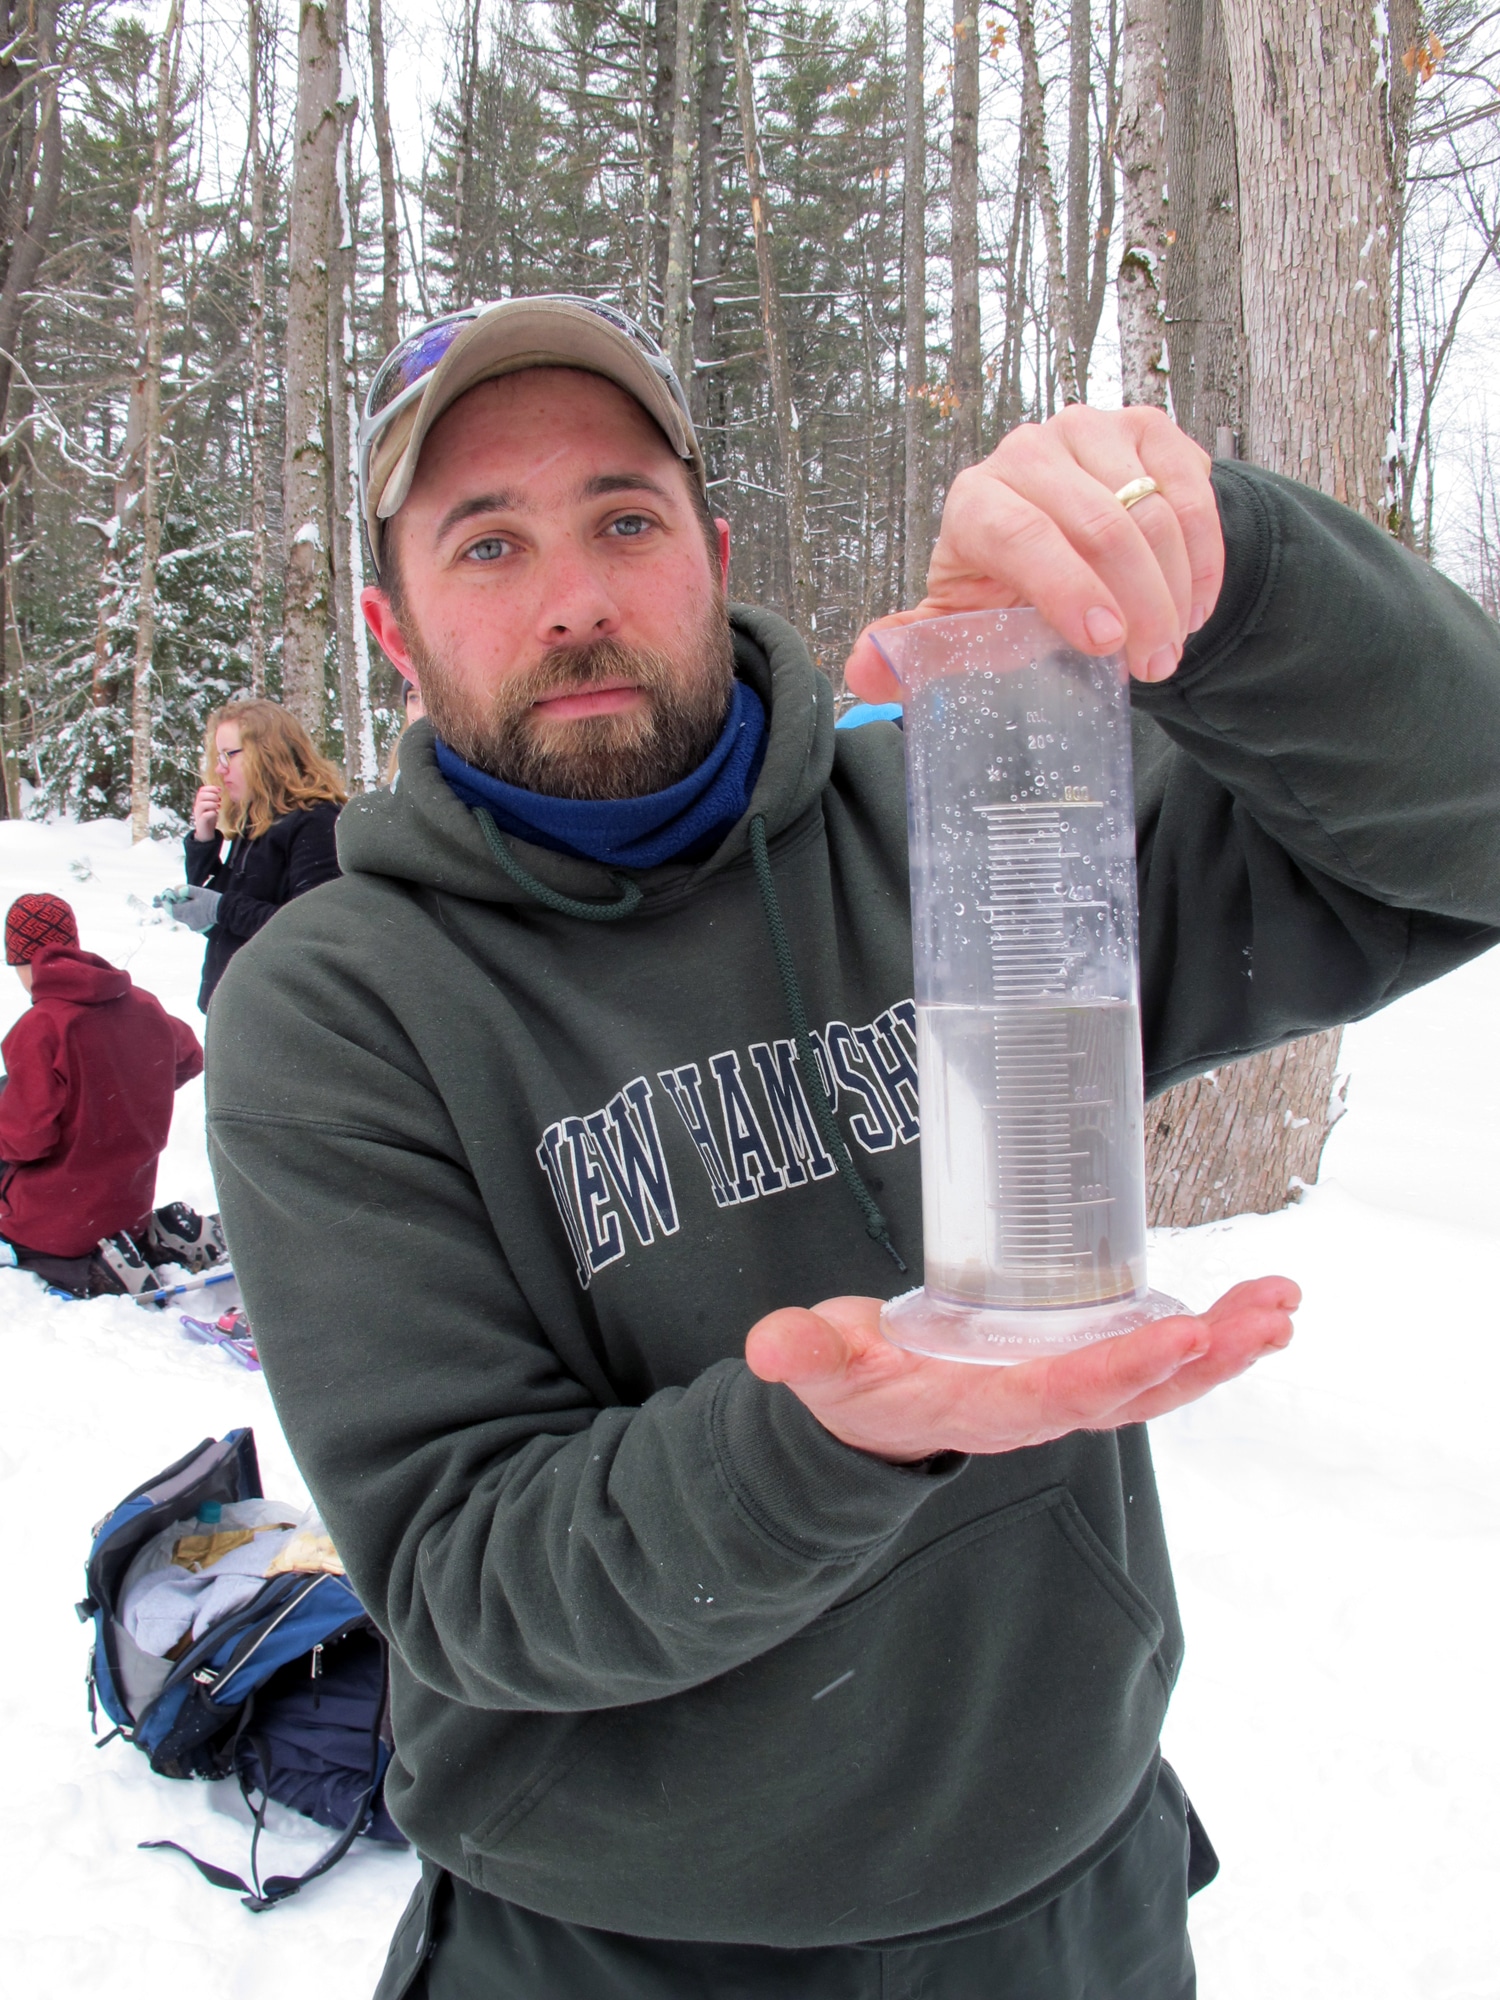 Otter Brook Farm manager Bryn Dumas shows off a graduated cylinder filled with melted snow. (photo © Brett Amy Thelen)